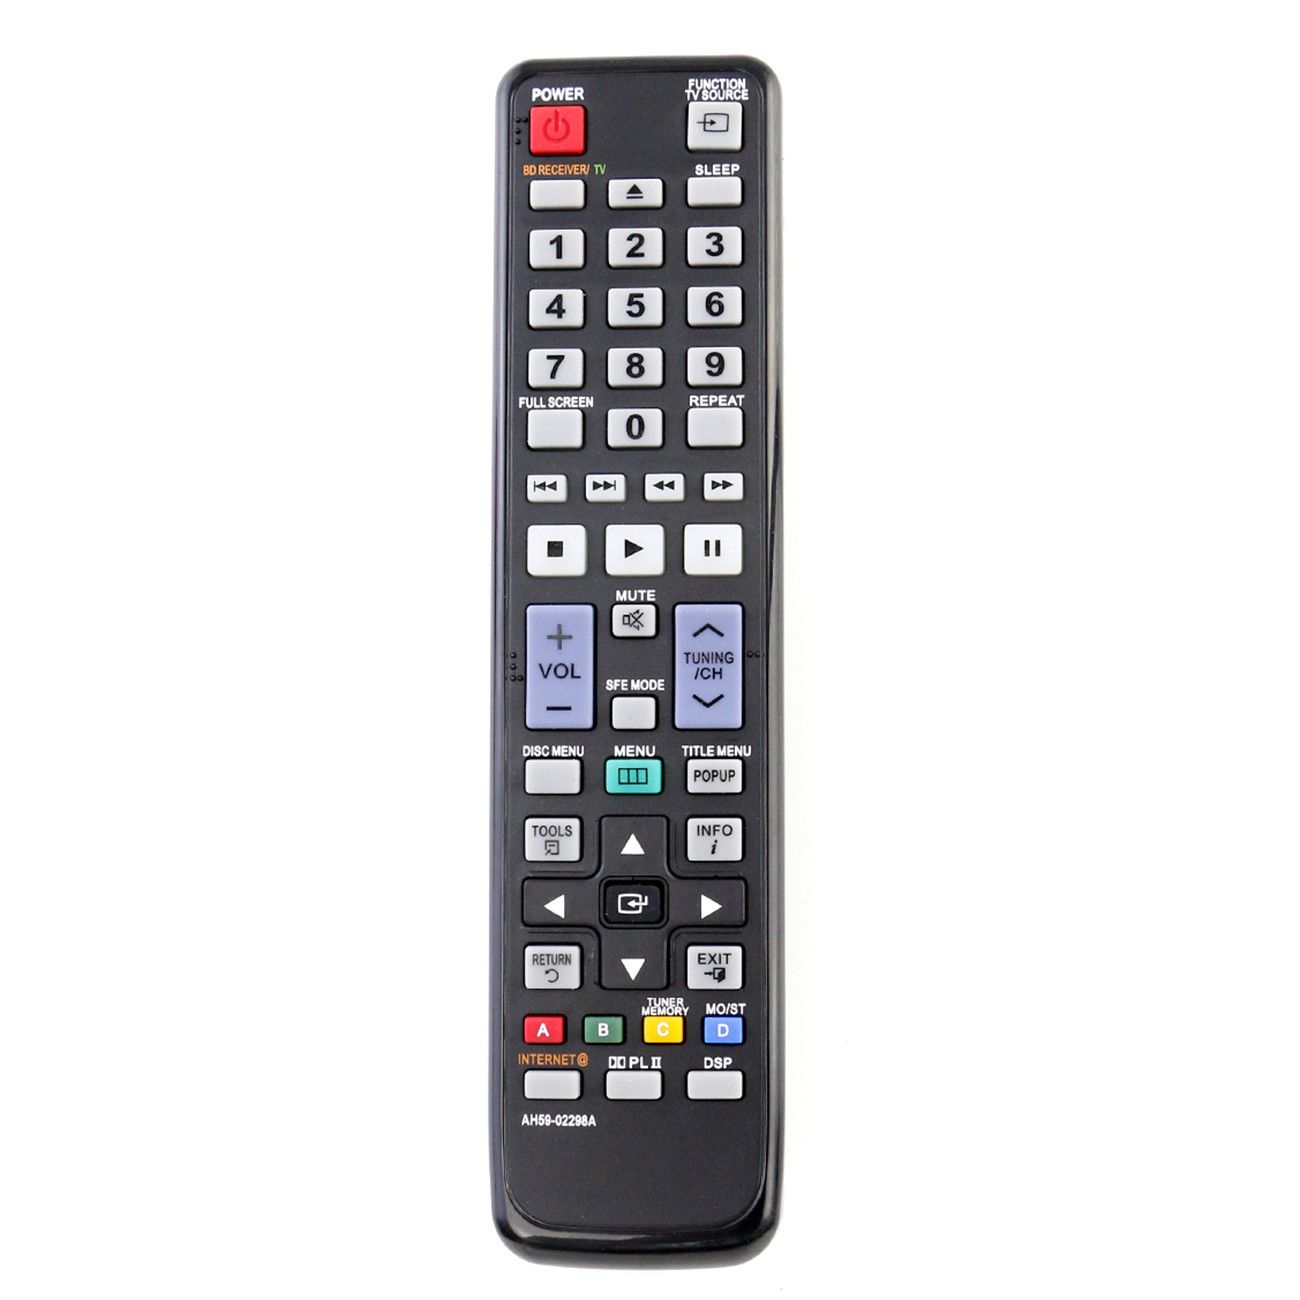 AH59-02298A Replacement Remote Control for Samsung Home Theater System HT-C5500 XSA